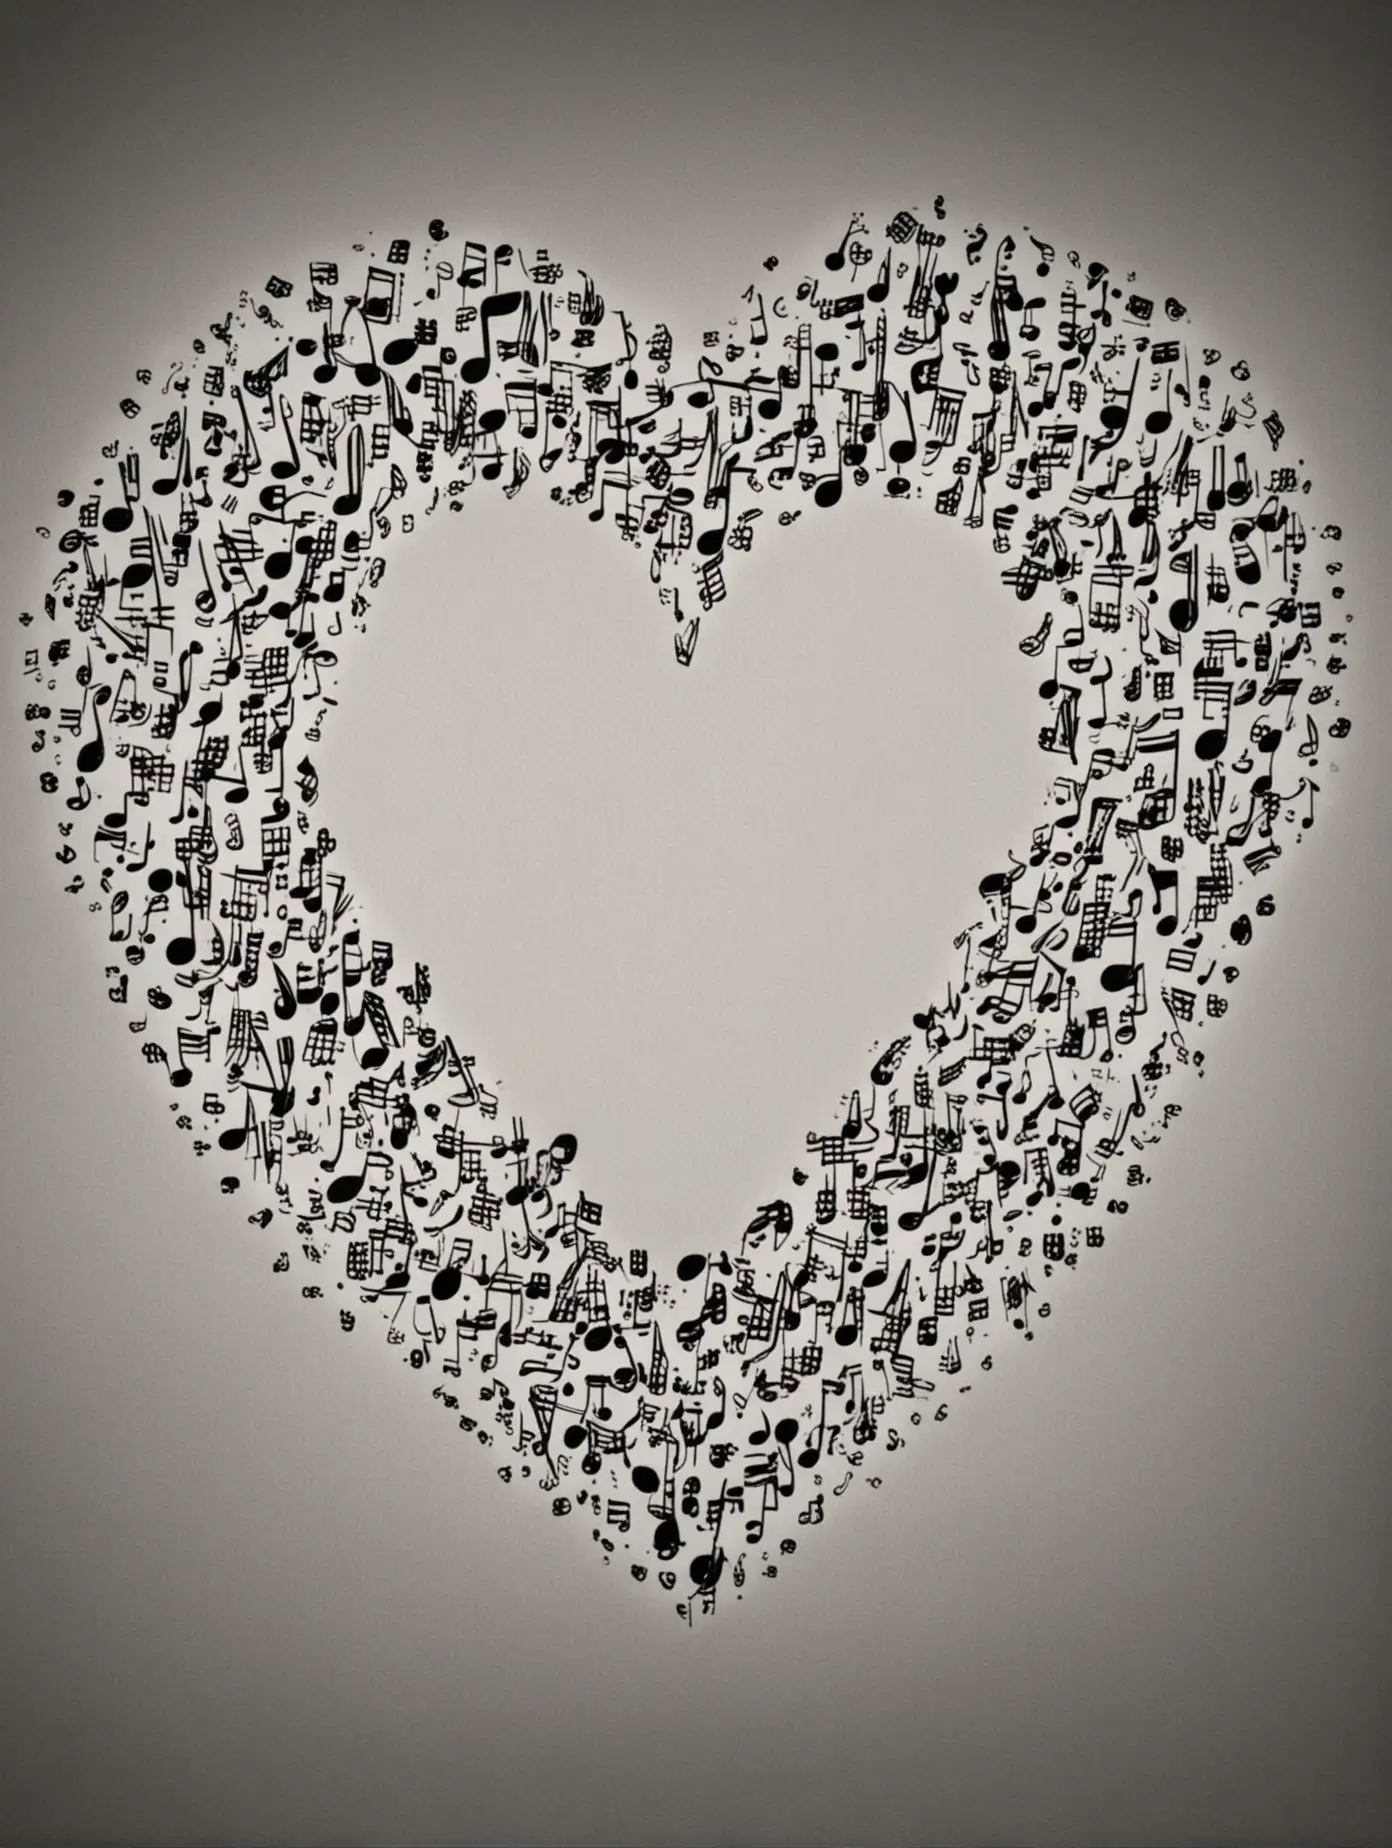  musical notes scattered over the entire background and in the center a clean part without  musical notes  heart-shaped notes